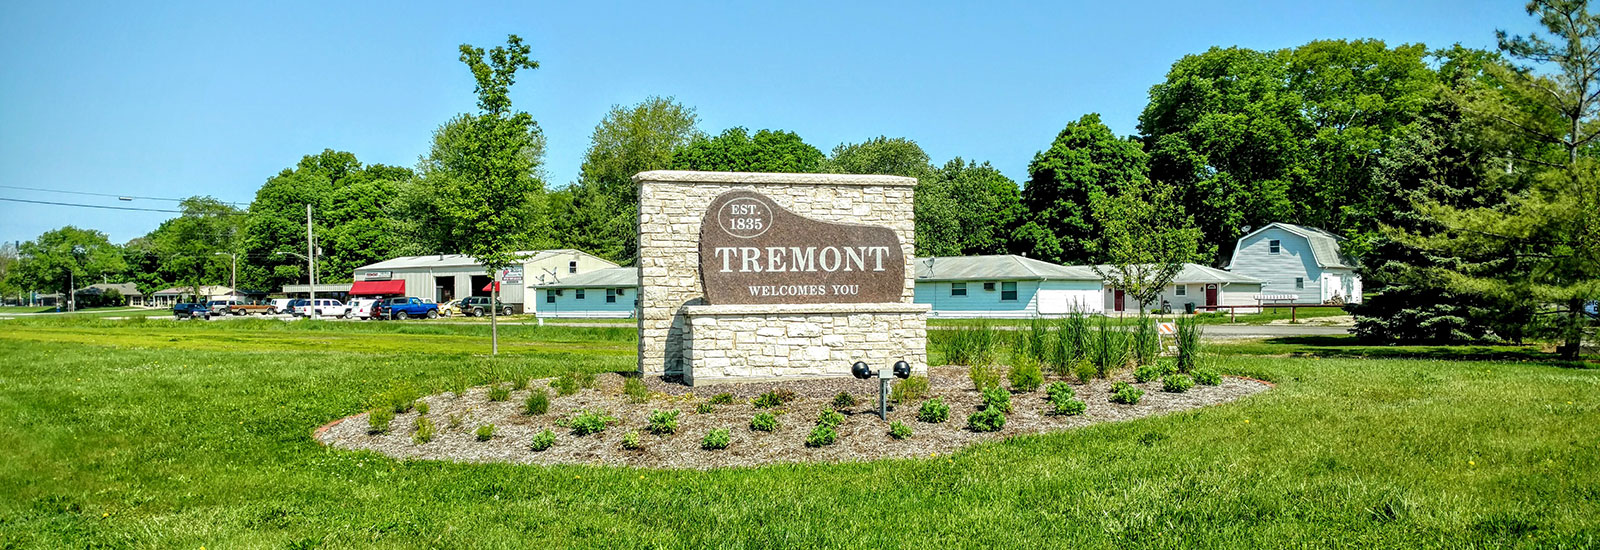 tremont sign